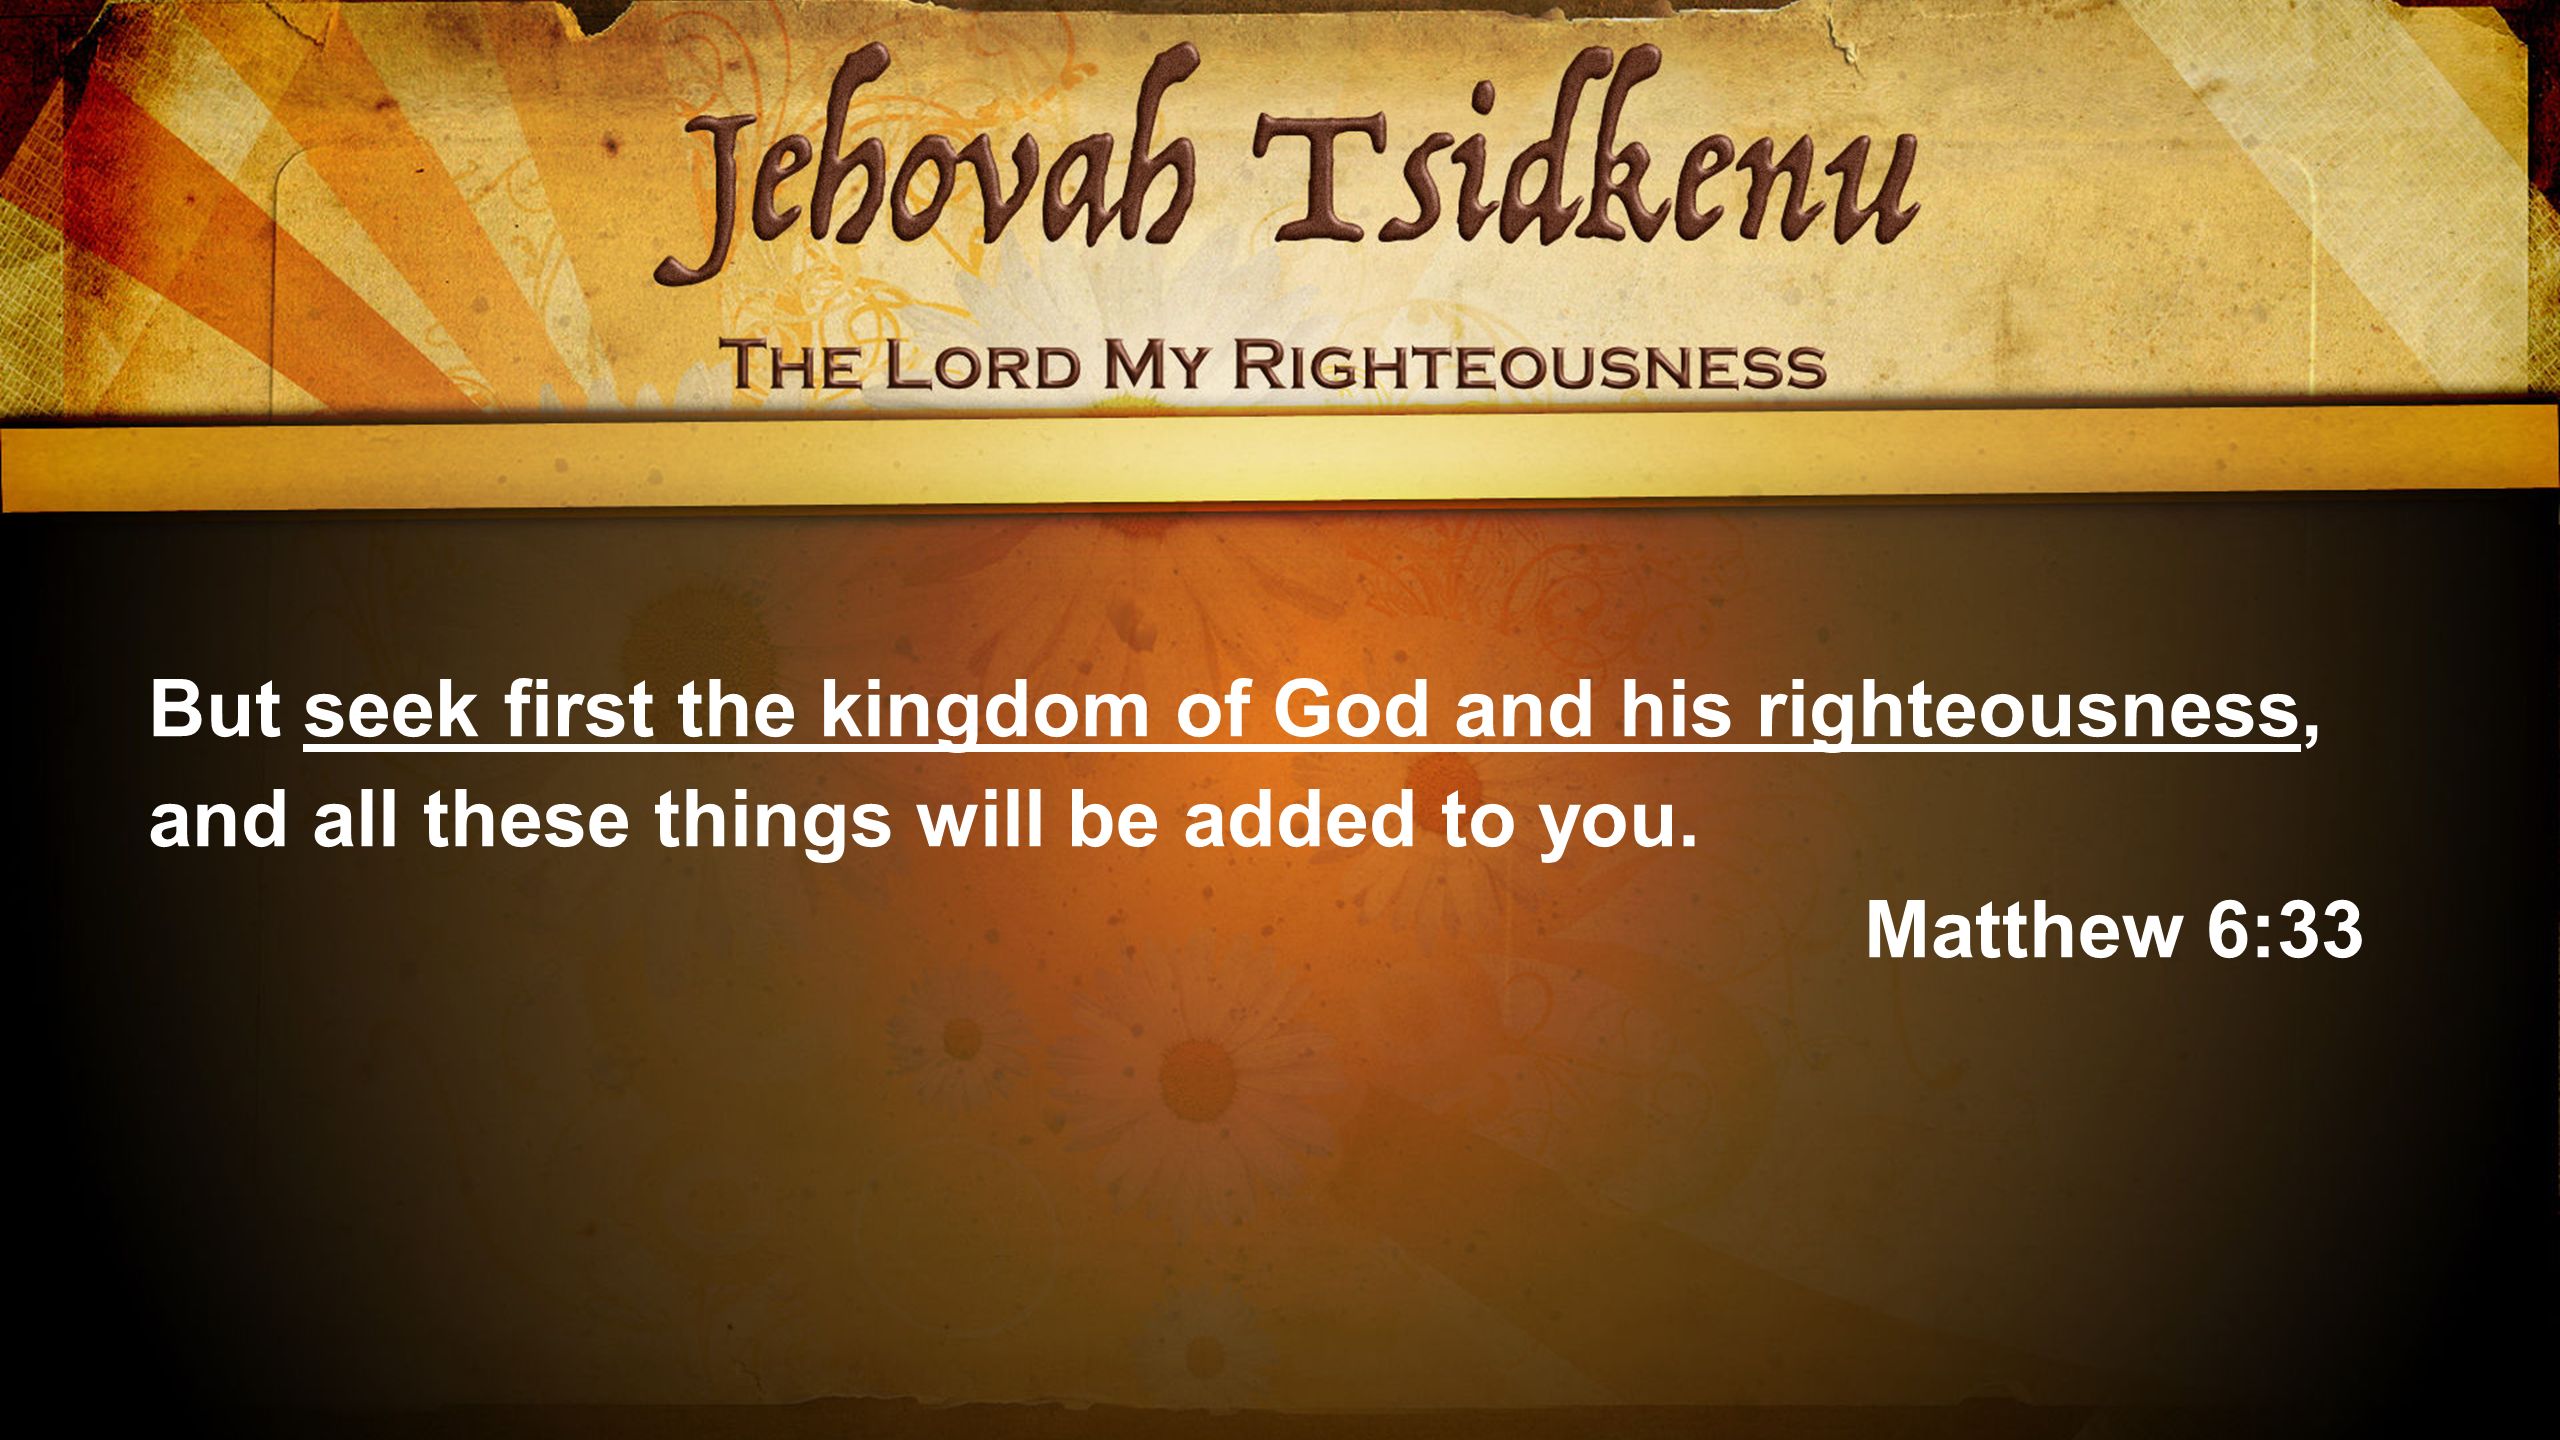 But seek first the kingdom of God and his righteousness, and all these things will be added to you.